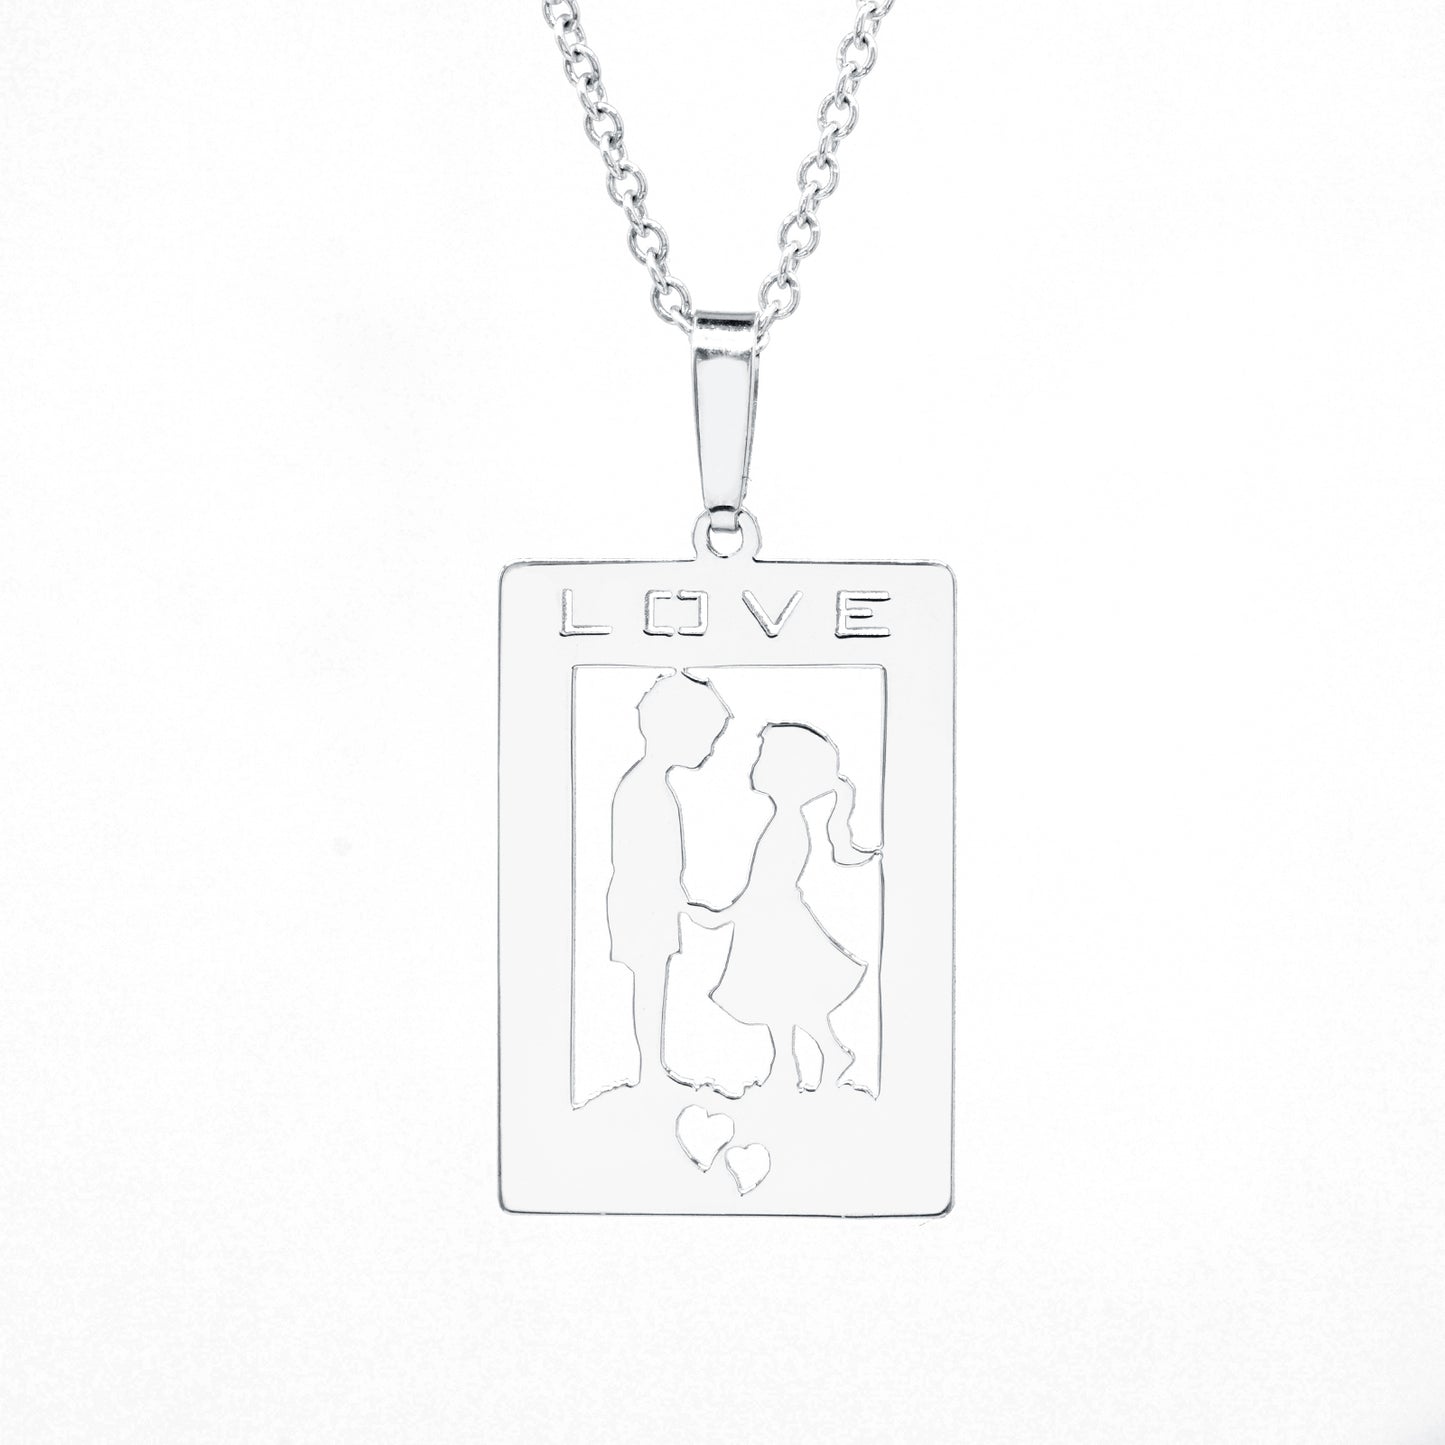 Punch Out Dog Tag Pendant in 14K Gold